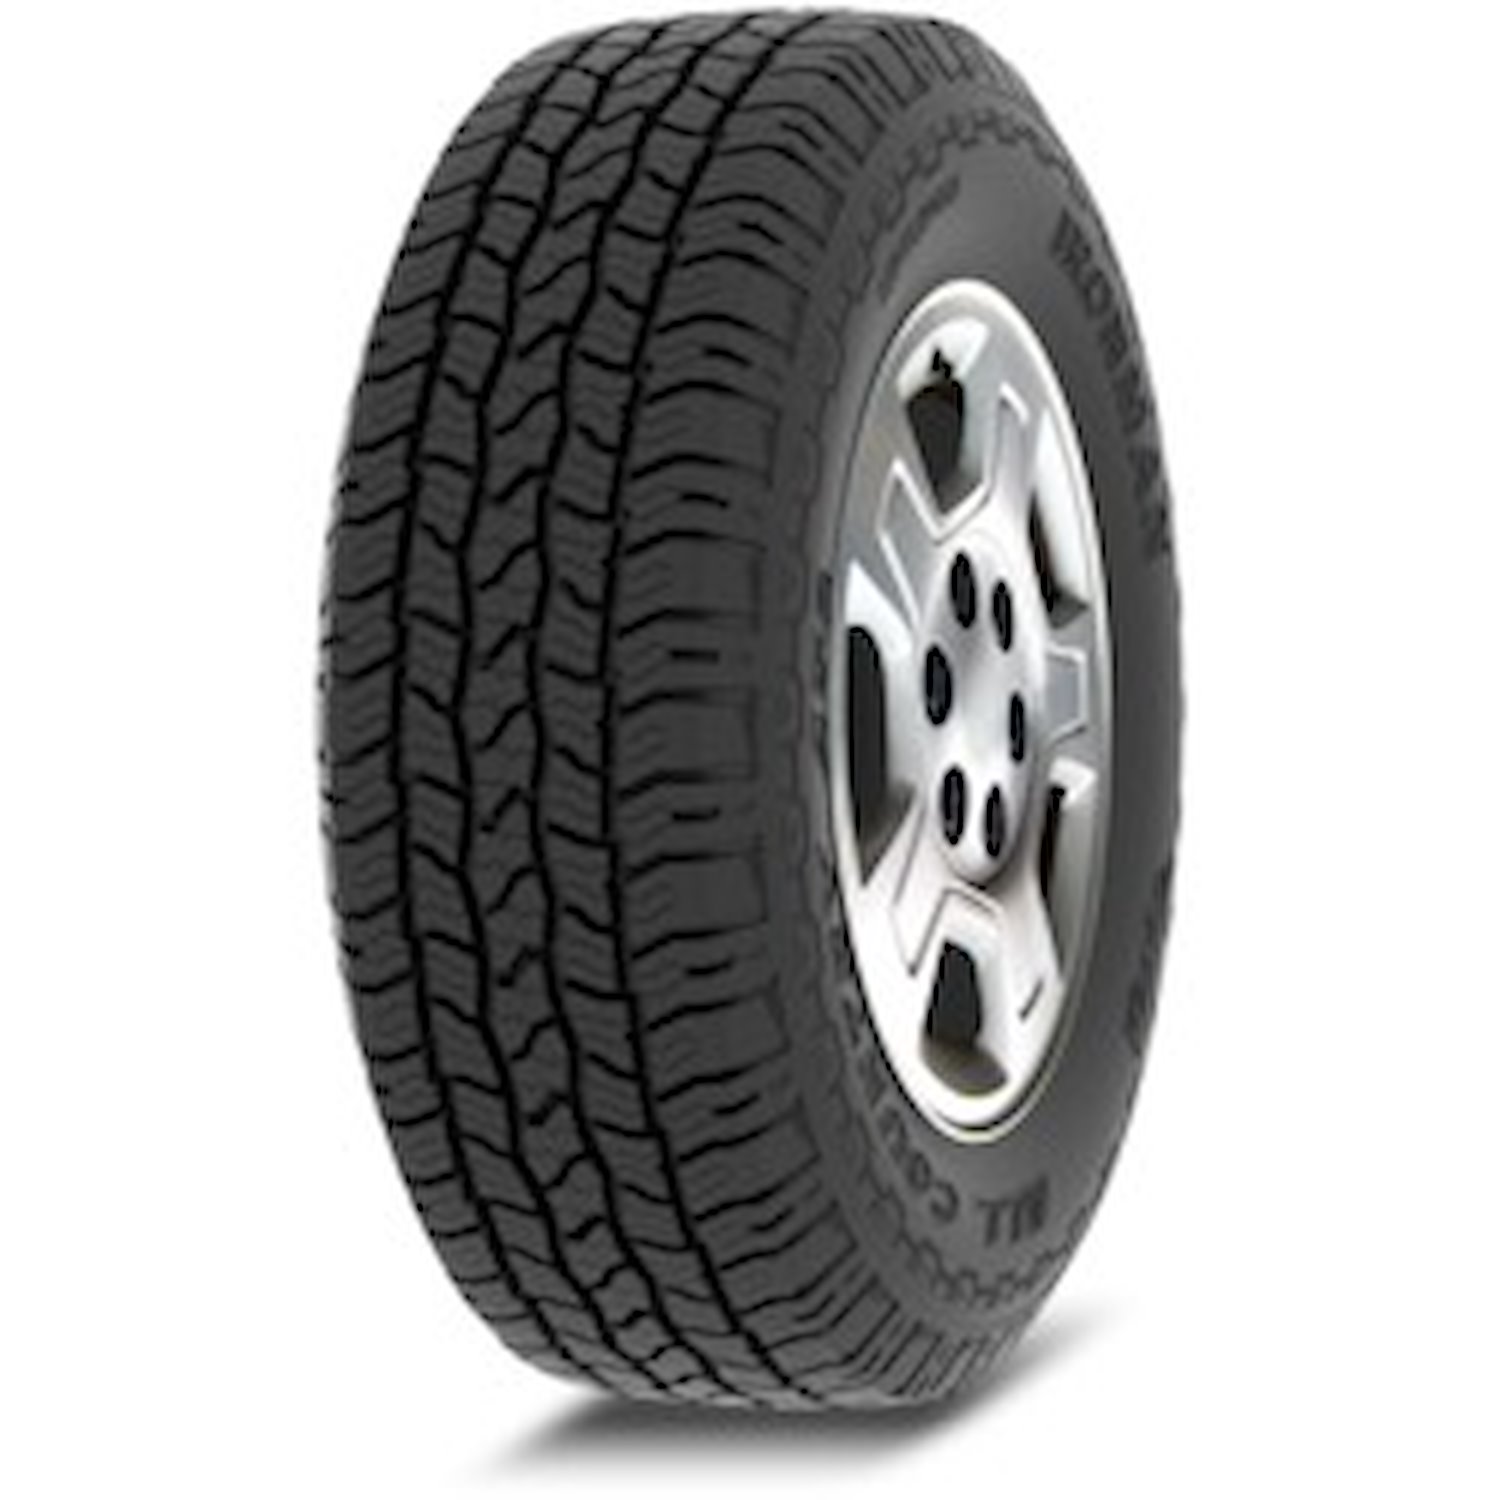 07714 All Country AT2 Tire, LT275/60R20, 123/120S